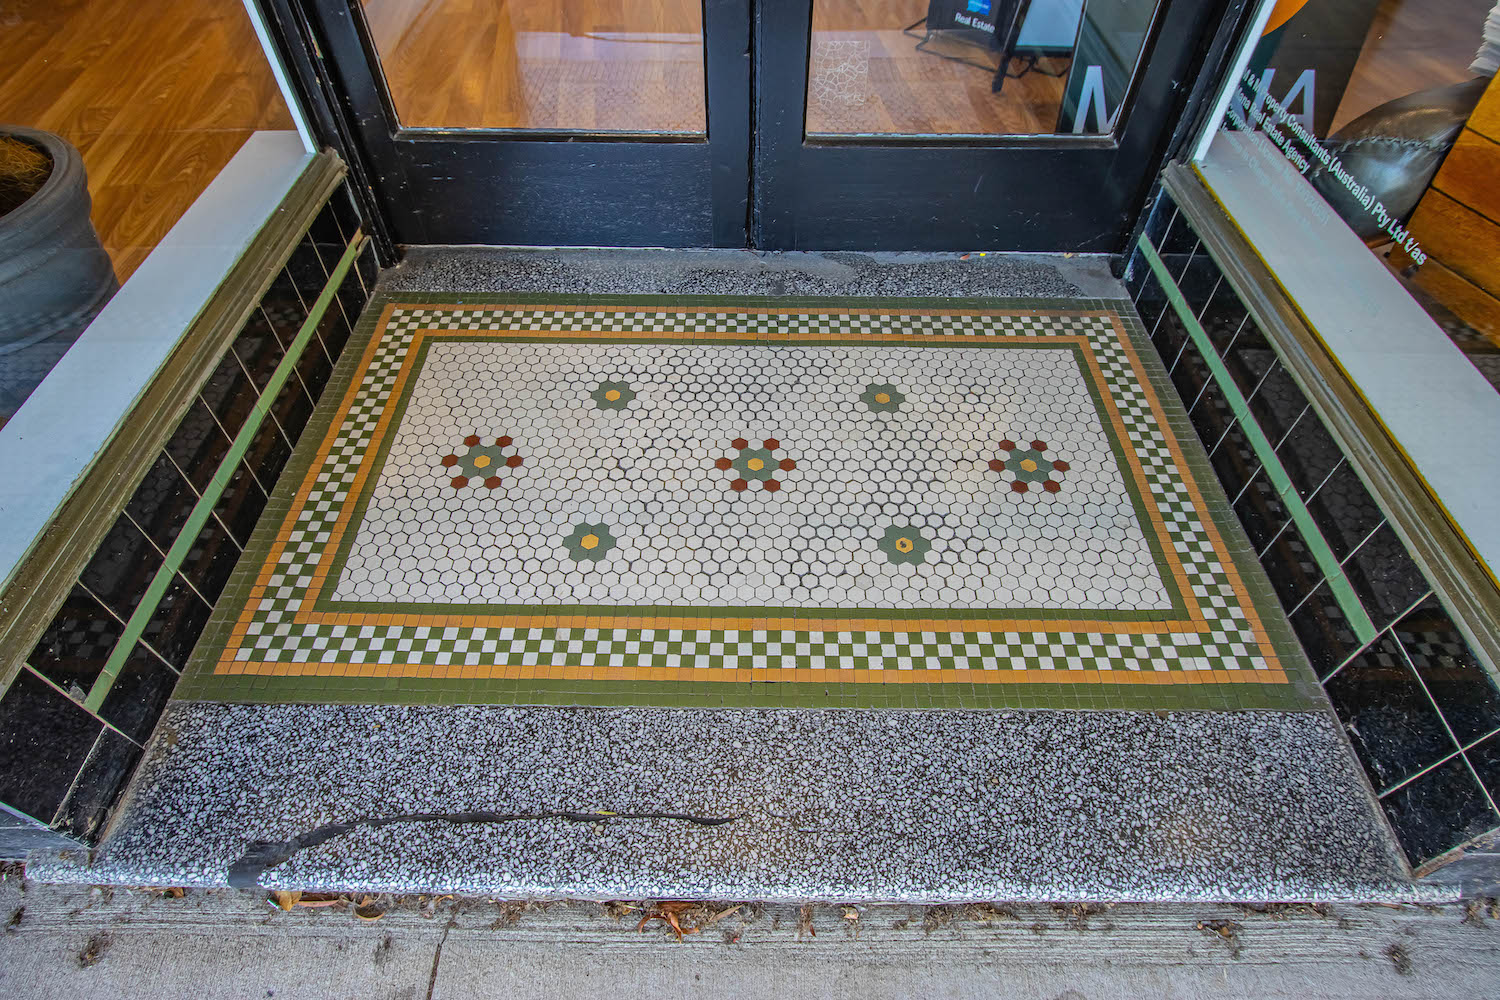 Grand historical entrance with patterened tiles, steeped in history.